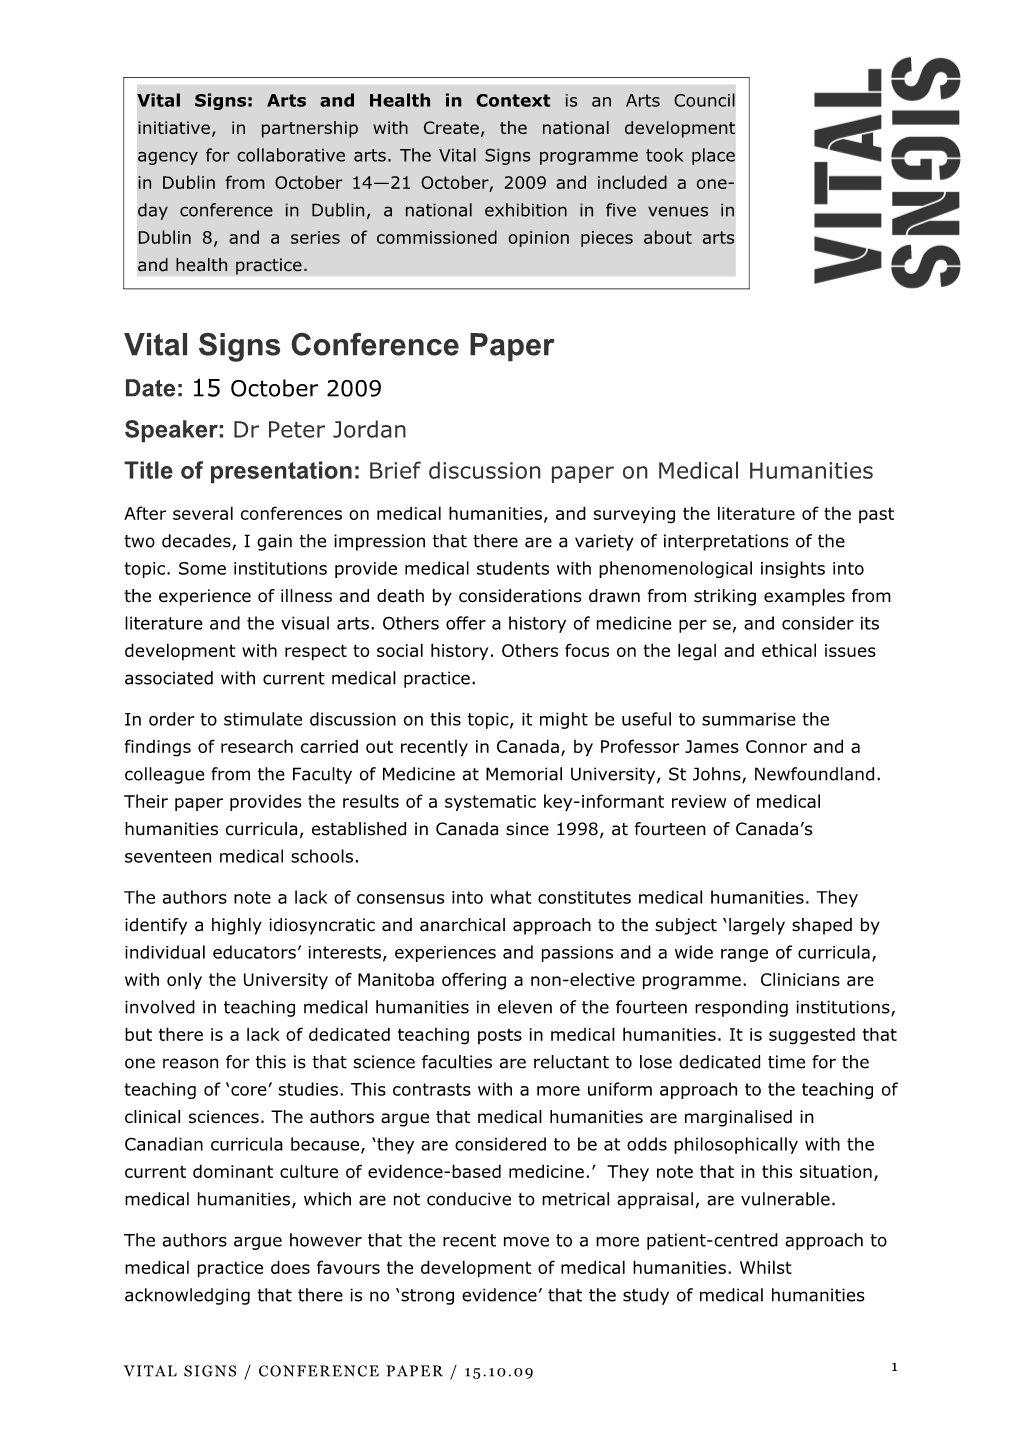 Vital Signs Conference Paper